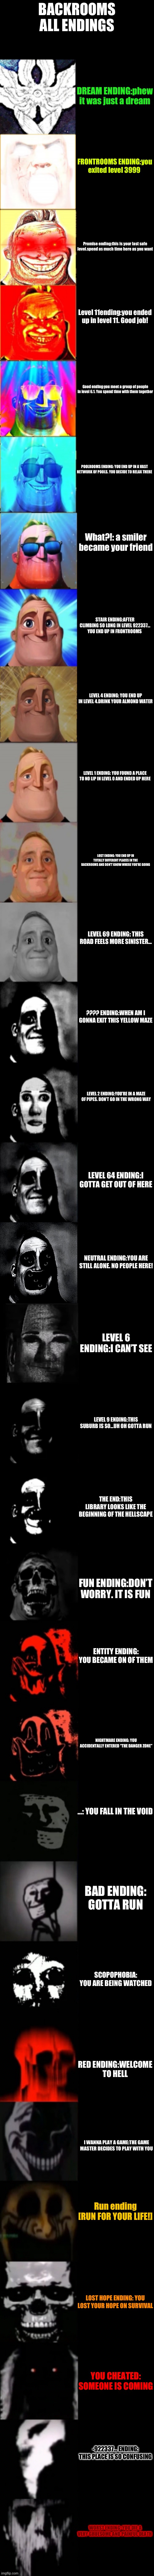 I created an all endings meme | BACKROOMS ALL ENDINGS; DREAM ENDING:phew it was just a dream; FRONTROOMS ENDING:you exited level 3999; Promise ending:this is your last safe level.spend as much time here as you want; Level 11ending:you ended up in level 11. Good job! Good ending:you meet a group of people in level 6.1. You spend time with them together; POOLROOMS ENDING: YOU END UP IN A VAST NETWORK OF POOLS. YOU DECIDE TO RELAX THERE; What?!: a smiler became your friend; STAIR ENDING:AFTER CLIMBING SO LONG IN LEVEL 922337…
YOU END UP IN FRONTROOMS; LEVEL 4 ENDING: YOU END UP IN LEVEL 4.DRINK YOUR ALMOND WATER; LEVEL 1 ENDING: YOU FOUND A PLACE TO NO LIP IN LEVEL 0 AND ENDED UP HERE; LOST ENDING: YOU END UP IN TOTALLY DIFFERENT PLACES IN THE BACKROOMS AND DON’T KNOW WHERE YOU’RE GOING; LEVEL 69 ENDING: THIS ROAD FEELS MORE SINISTER…; ???? ENDING:WHEN AM I GONNA EXIT THIS YELLOW MAZE; LEVEL 2 ENDING:YOU’RE IN A MAZE OF PIPES. DON’T GO IN THE WRONG WAY; LEVEL 64 ENDING:I GOTTA GET OUT OF HERE; NEUTRAL ENDING:YOU ARE STILL ALONE. NO PEOPLE HERE! LEVEL 6 ENDING:I CAN’T SEE; LEVEL 9 ENDING:THIS SUBURB IS SO…UH OH GOTTA RUN; THE END:THIS LIBRARY LOOKS LIKE THE BEGINNING OF THE HELLSCAPE; FUN ENDING:DON’T WORRY. IT IS FUN; ENTITY ENDING: YOU BECAME ON OF THEM; NIGHTMARE ENDING: YOU ACCIDENTALLY ENTERED “THE DANGER ZONE”; …: YOU FALL IN THE VOID; BAD ENDING: GOTTA RUN; SCOPOPHOBIA: YOU ARE BEING WATCHED; RED ENDING:WELCOME TO HELL; I WANNA PLAY A GAME:THE GAME MASTER DECIDES TO PLAY WITH YOU; Run ending [RUN FOR YOUR LIFE!]; LOST HOPE ENDING: YOU LOST YOUR HOPE ON SURVIVAL; YOU CHEATED: SOMEONE IS COMING; -922337… ENDING: THIS PLACE IS SO CONFUSING; WORST ENDING: YOU DIE A VERY GRUESOME AND PAINFUL DEATH | image tagged in mr incredible becoming canny to uncanny hd | made w/ Imgflip meme maker